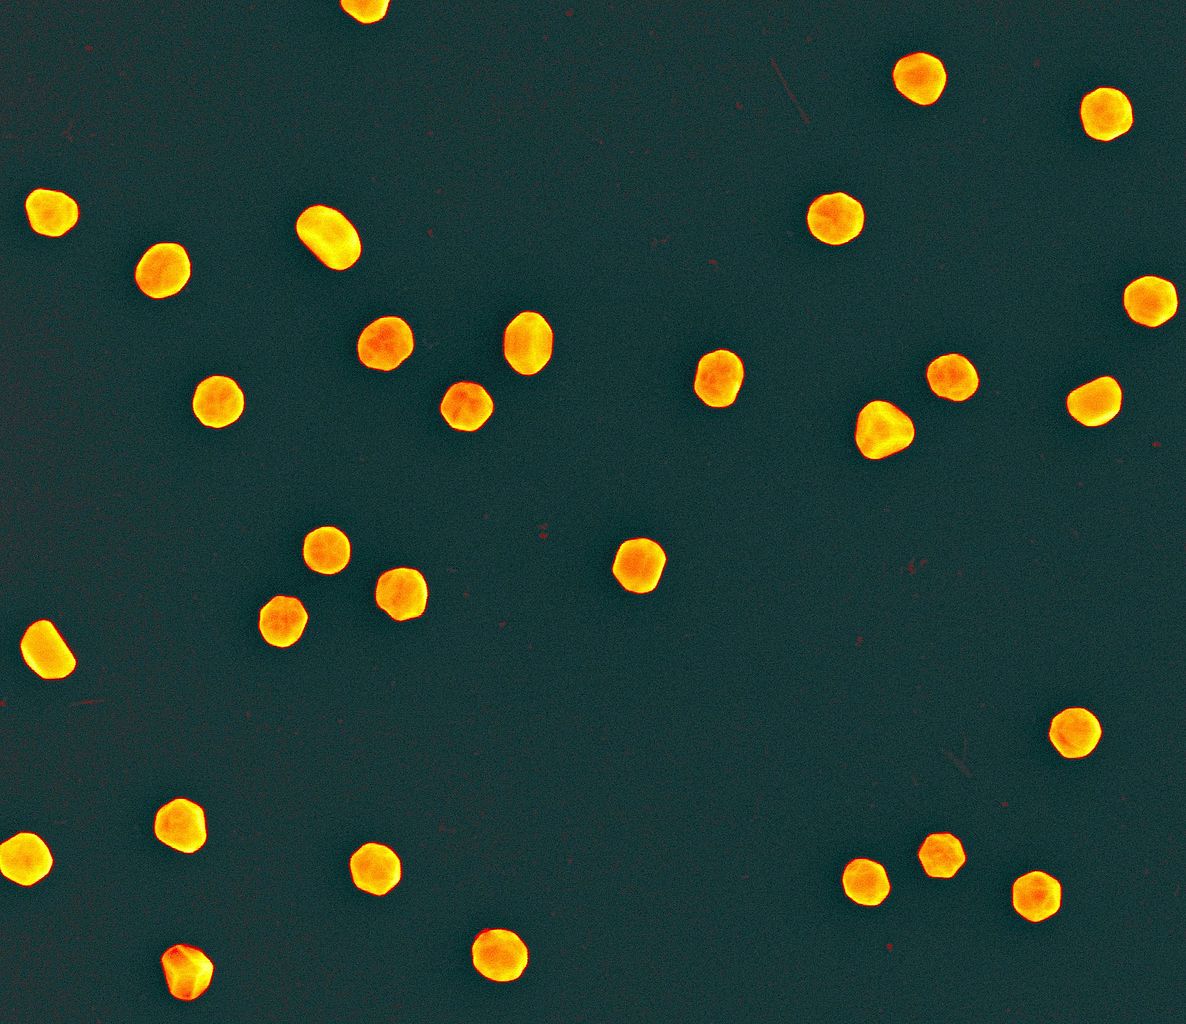 False color scanning electron micrograph showing gold nanoparticles